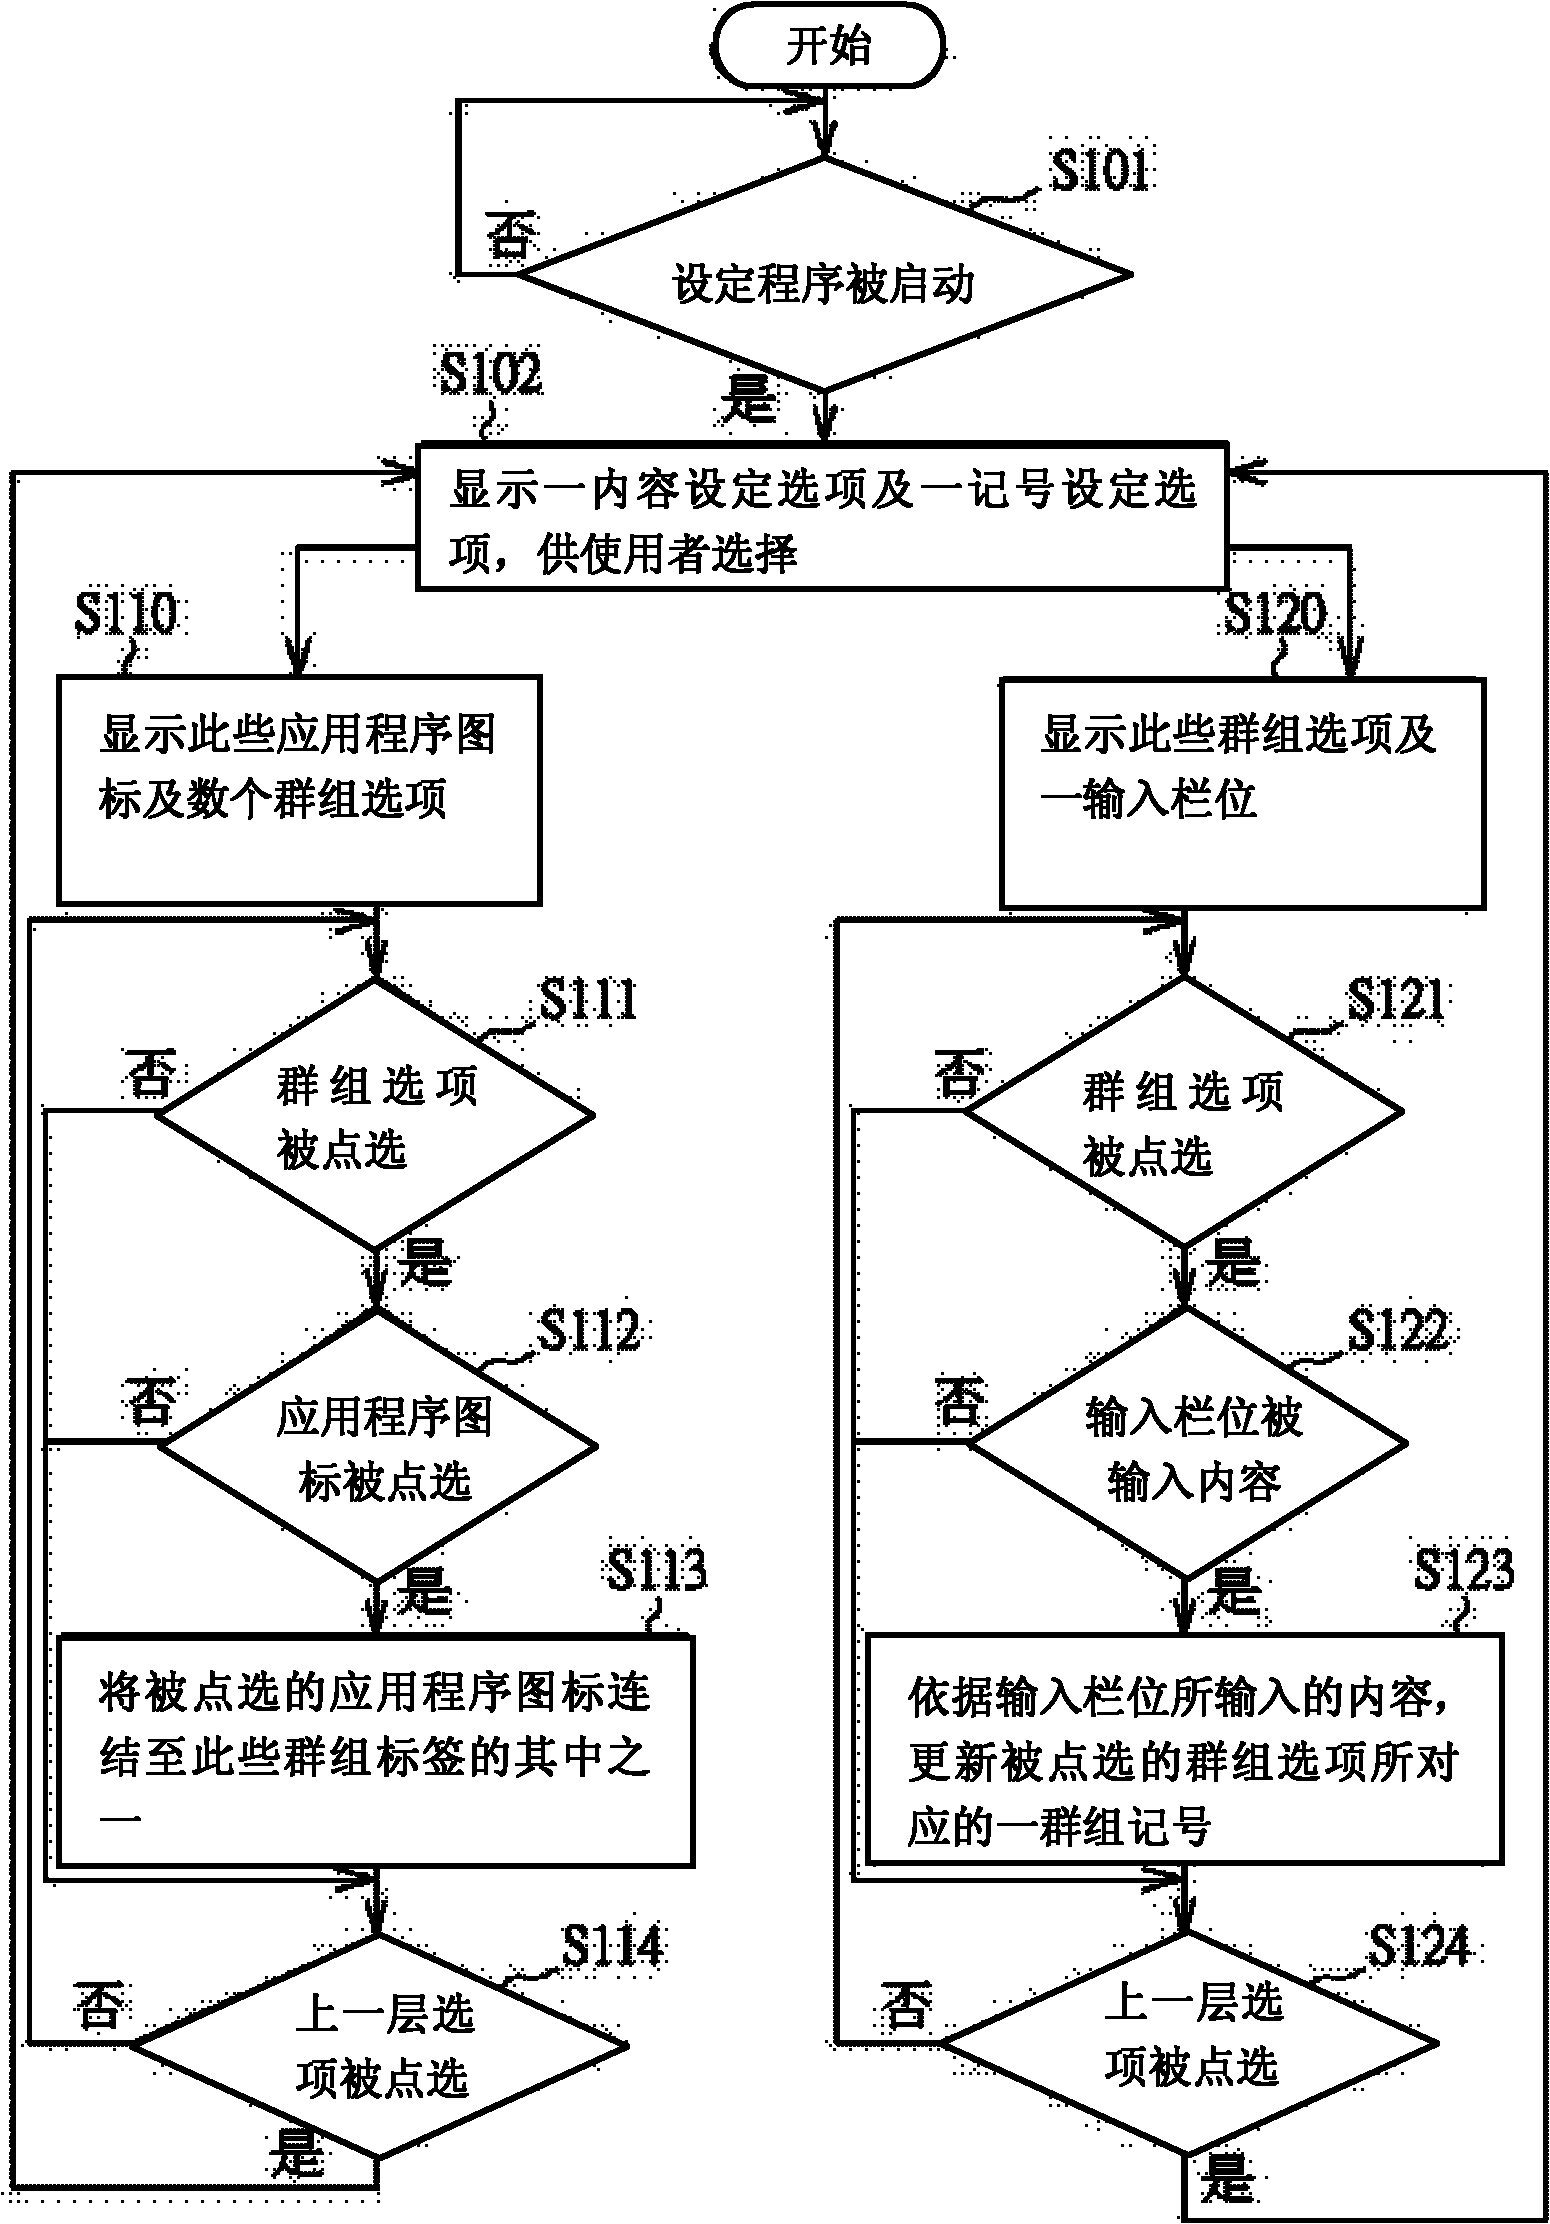 Method for displaying application icons of electronic device and group setting method